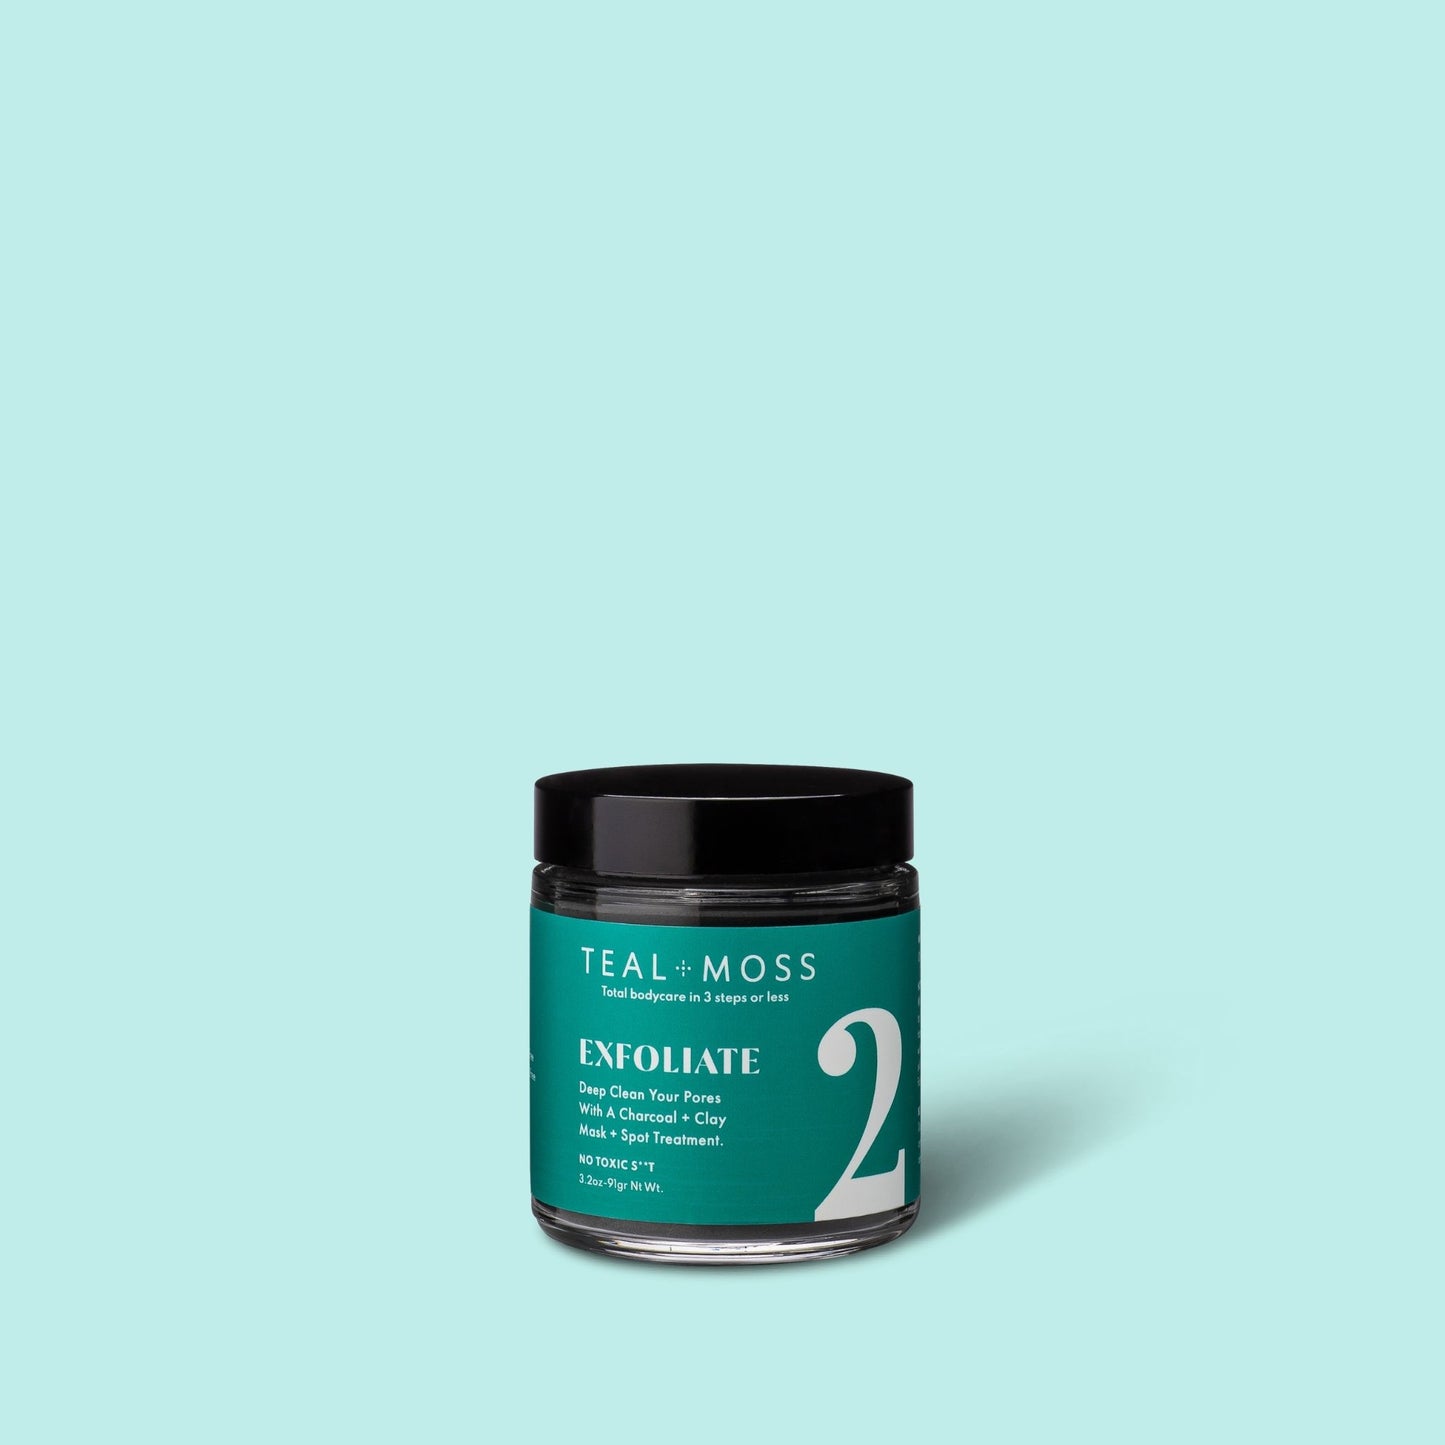 Teal and Moss mask + spot treatment 4 oz jar on a blue background